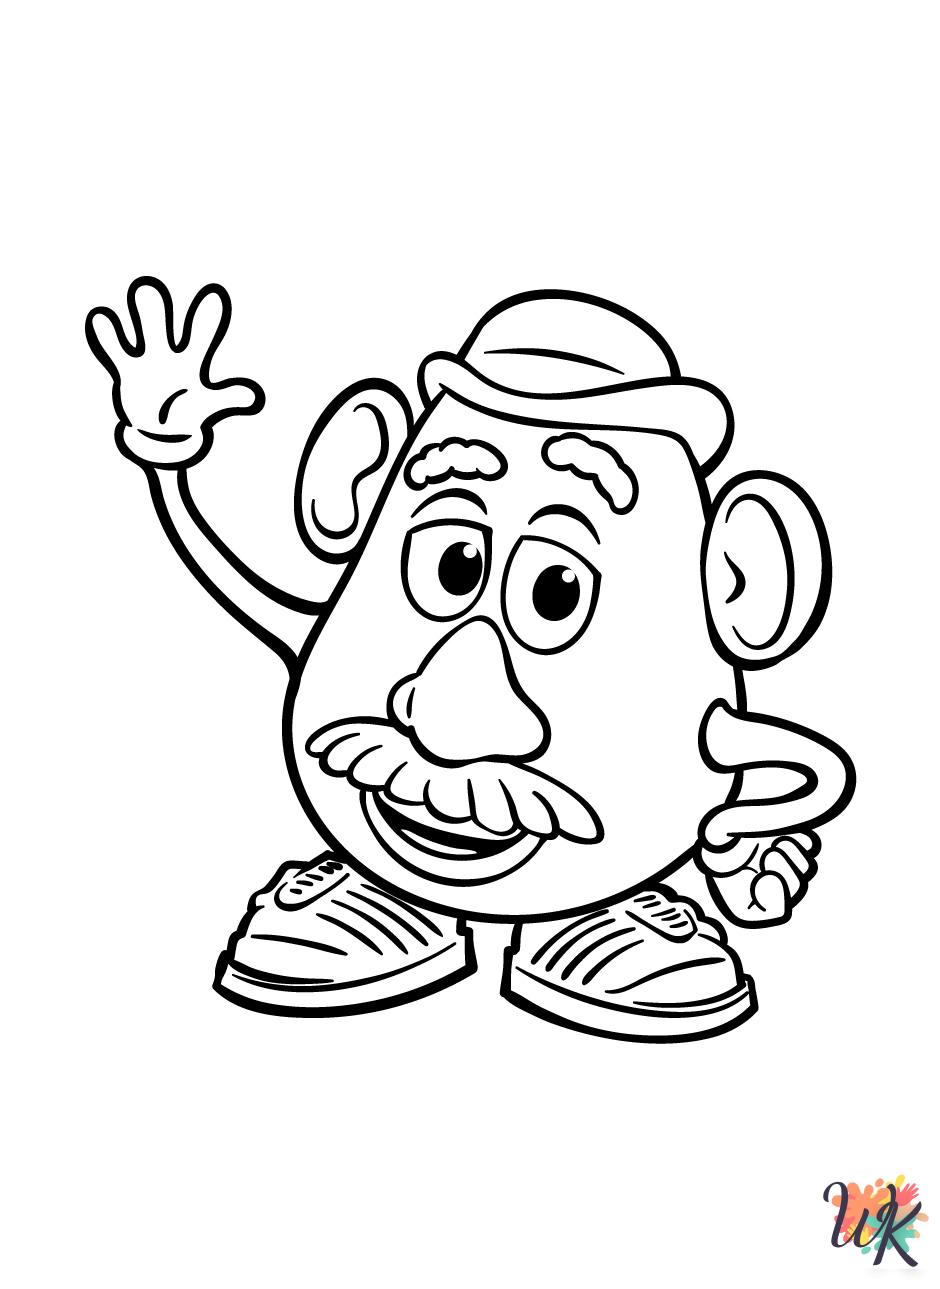 Toy Story coloring pages easy